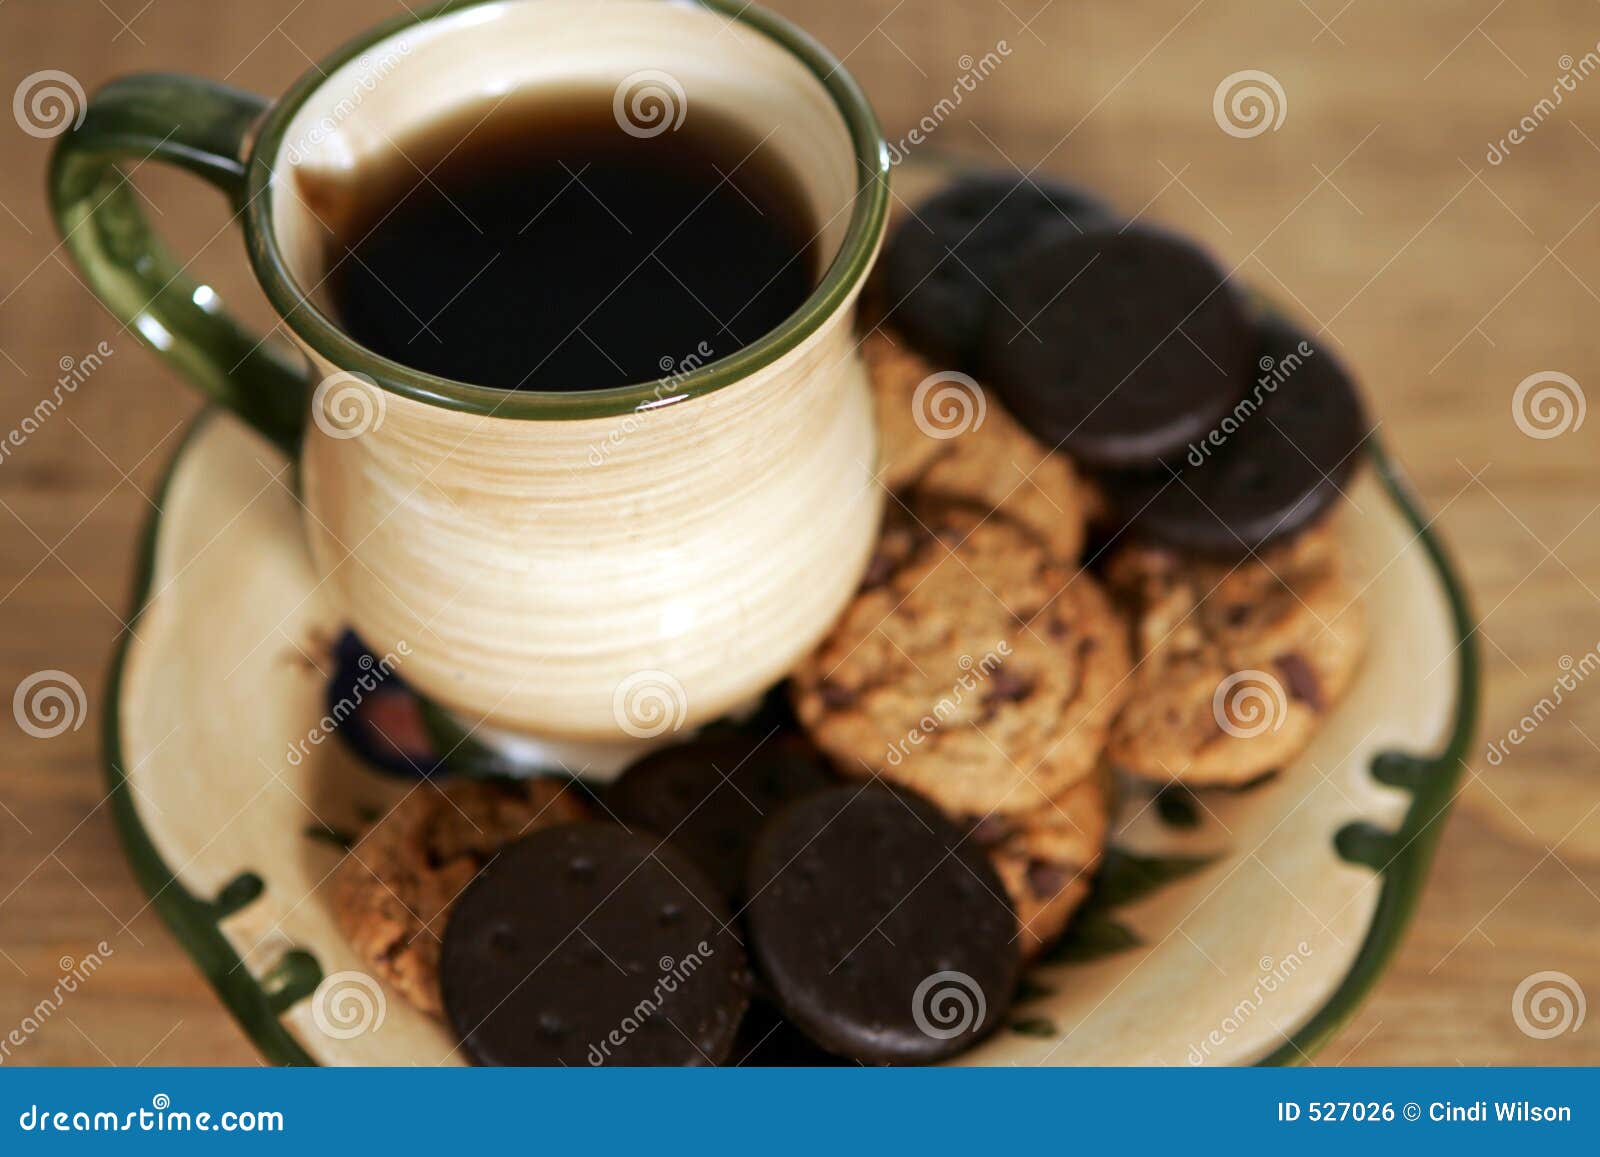 free clipart coffee and cookies - photo #18